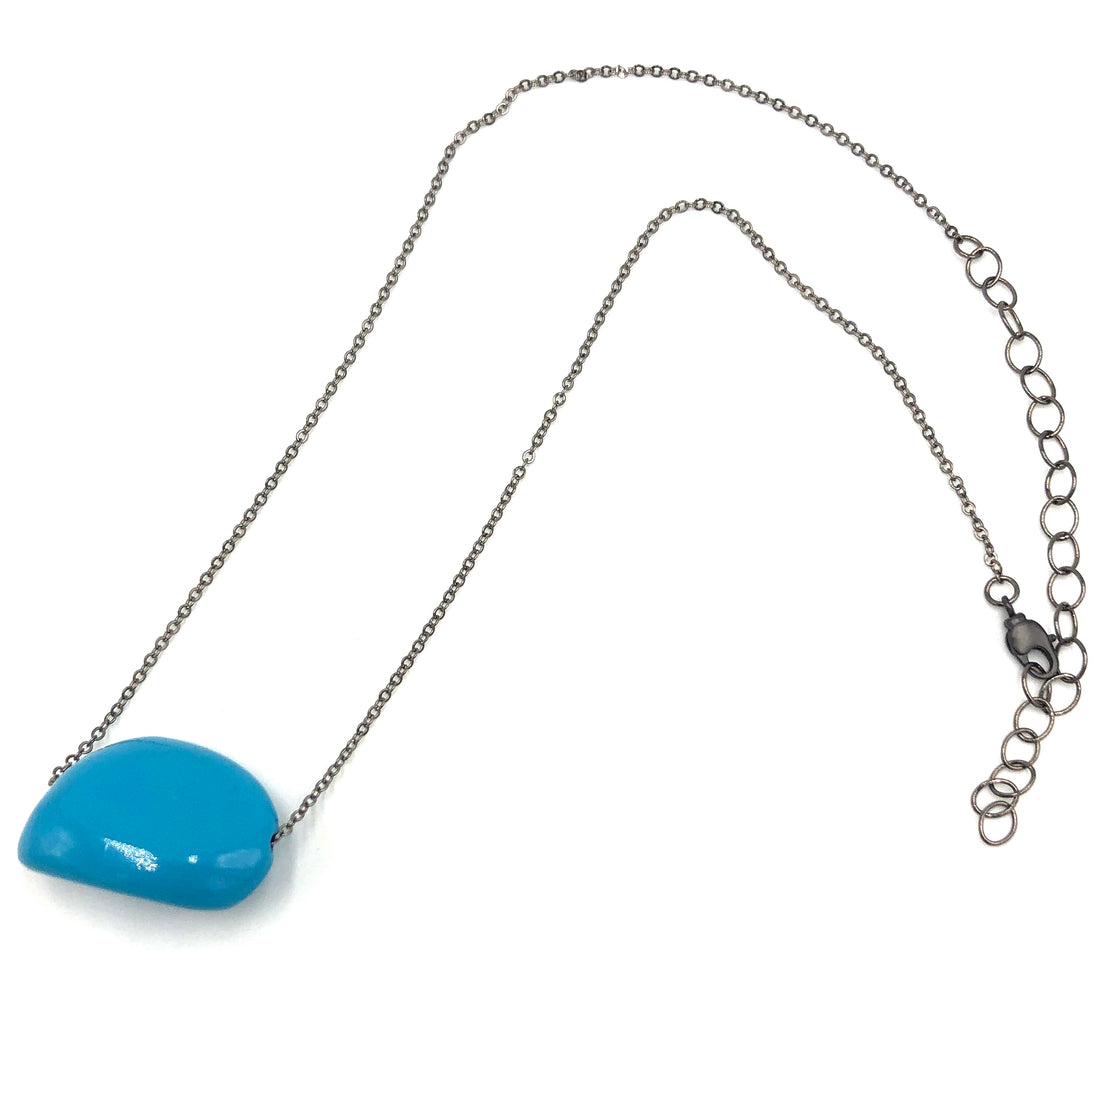 Turquoise Pebble Necklace